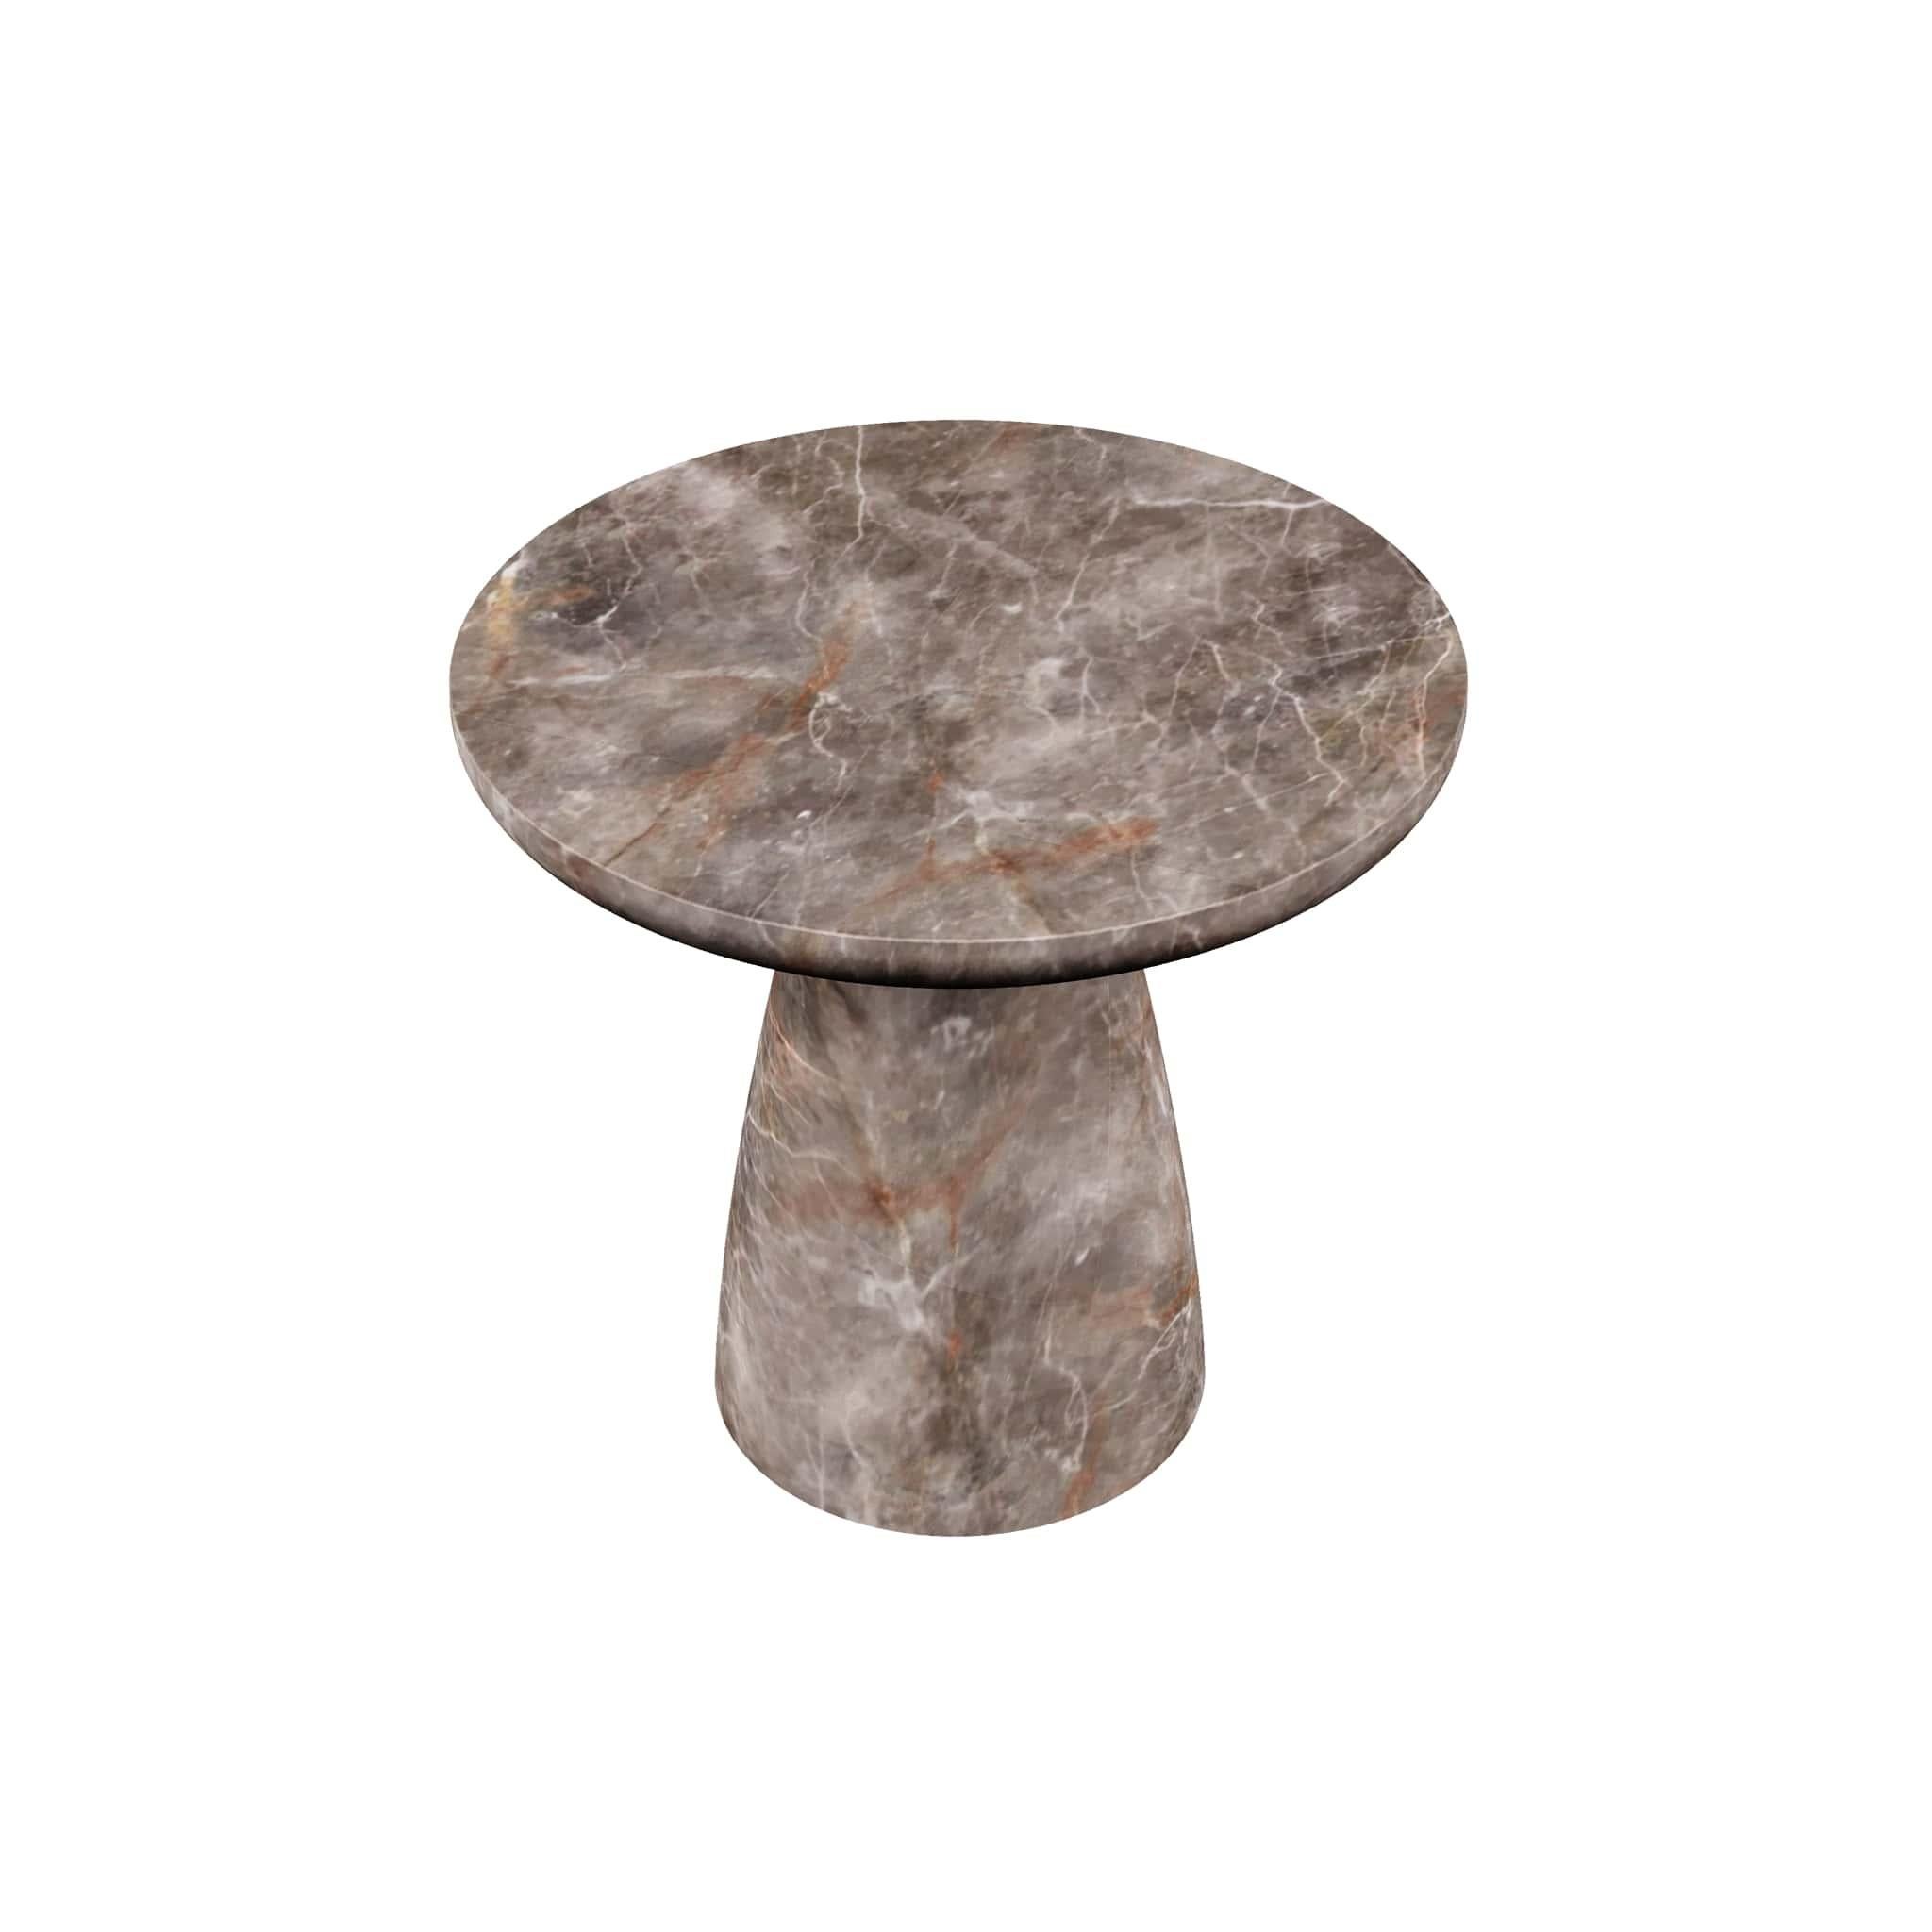 Lunarys Medium Side Table Fior di Bosco is an outstanding modern design piece crafted with a unique marble stone Fior di Bosco, making it a collector piece for any outdoor lover.

Materials: Body and Legs in Sandblasted Fior Di Bosco